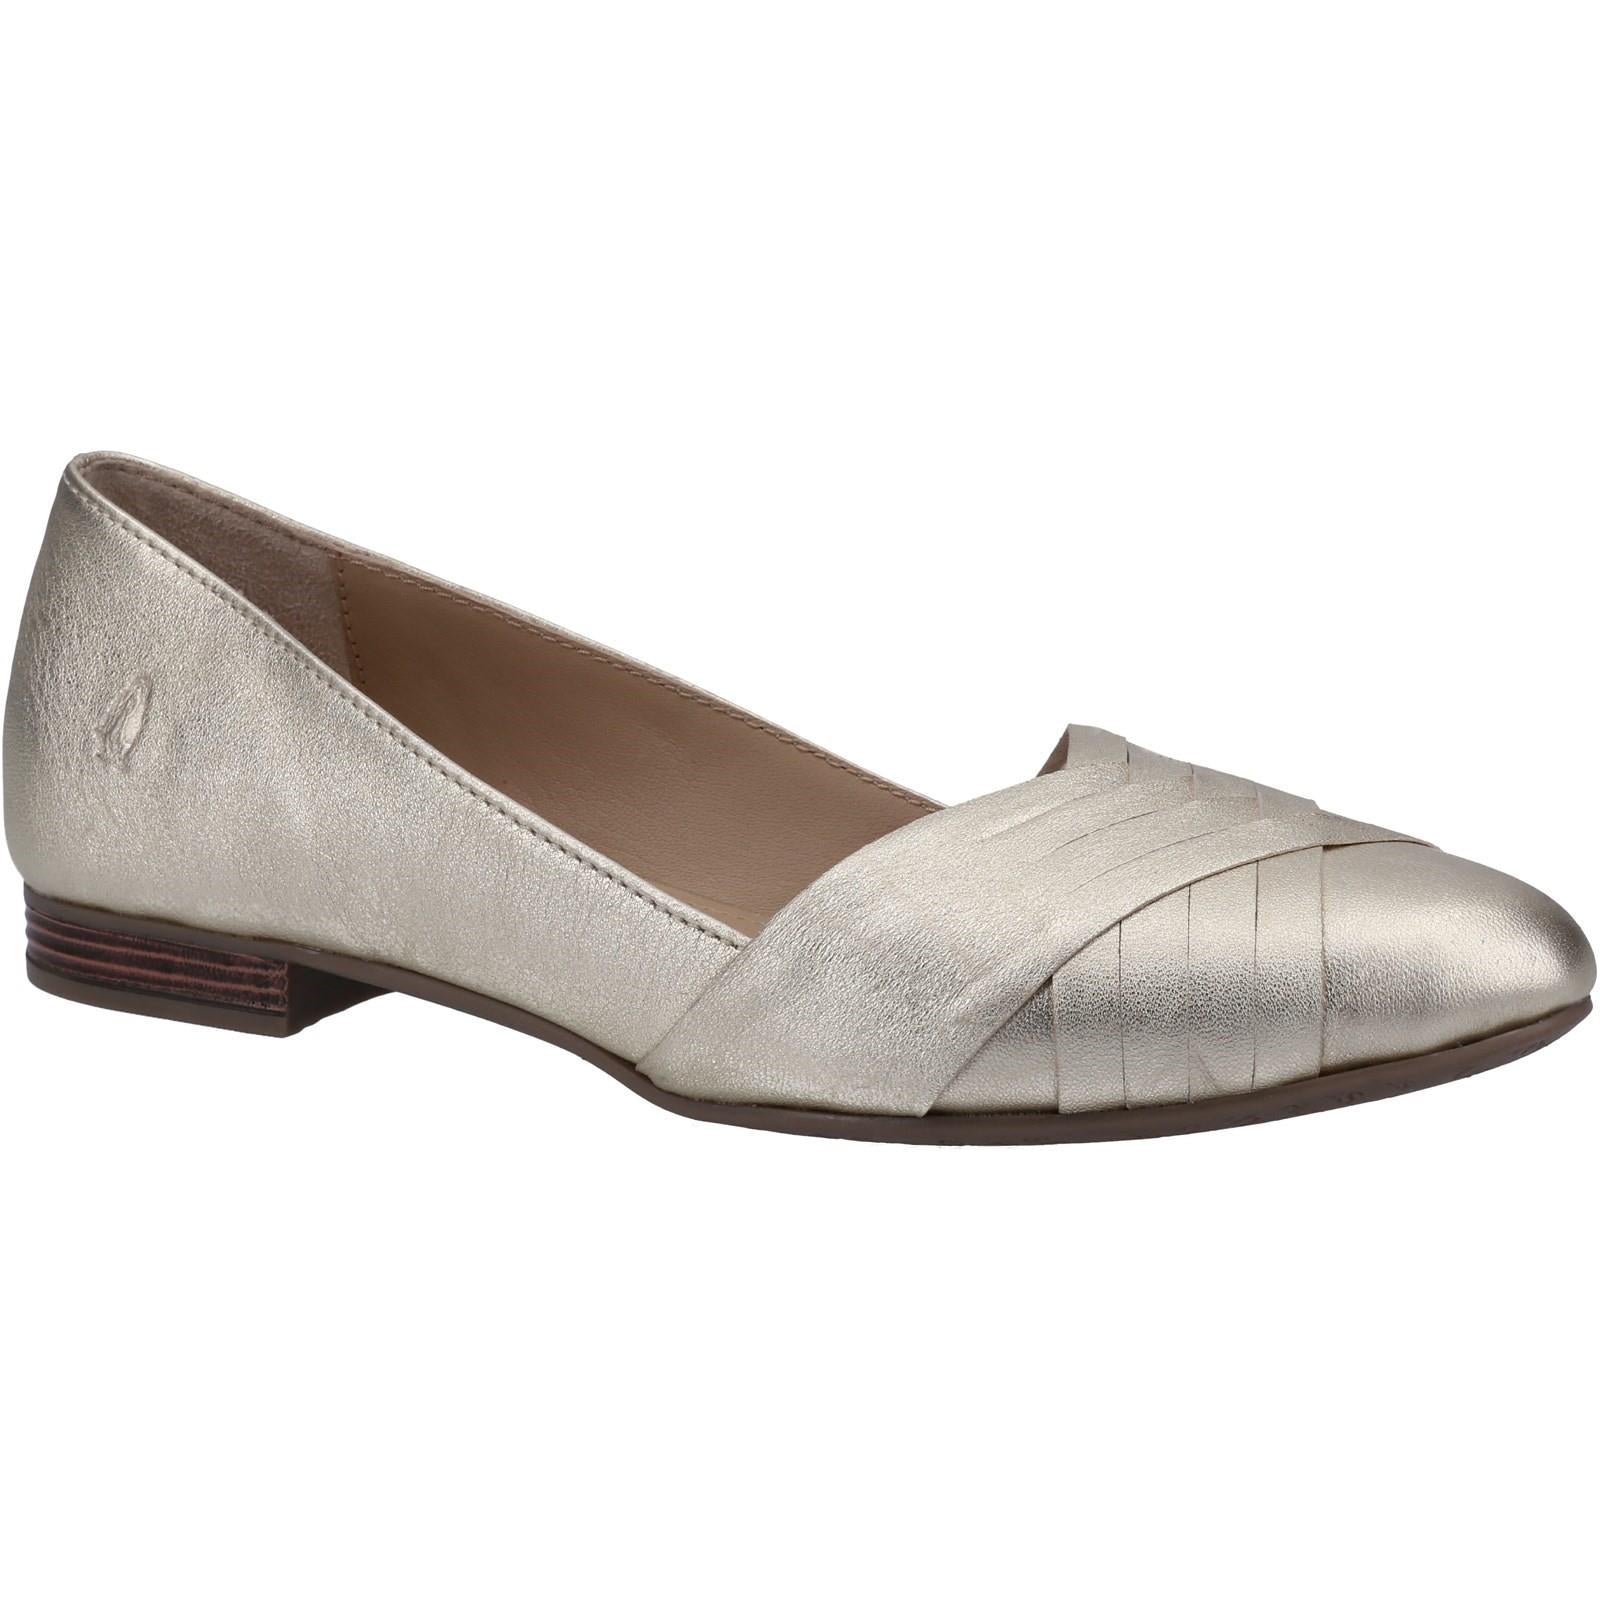 Hush Puppies Marley gold leather ladies slip on ballet ballerina shoes